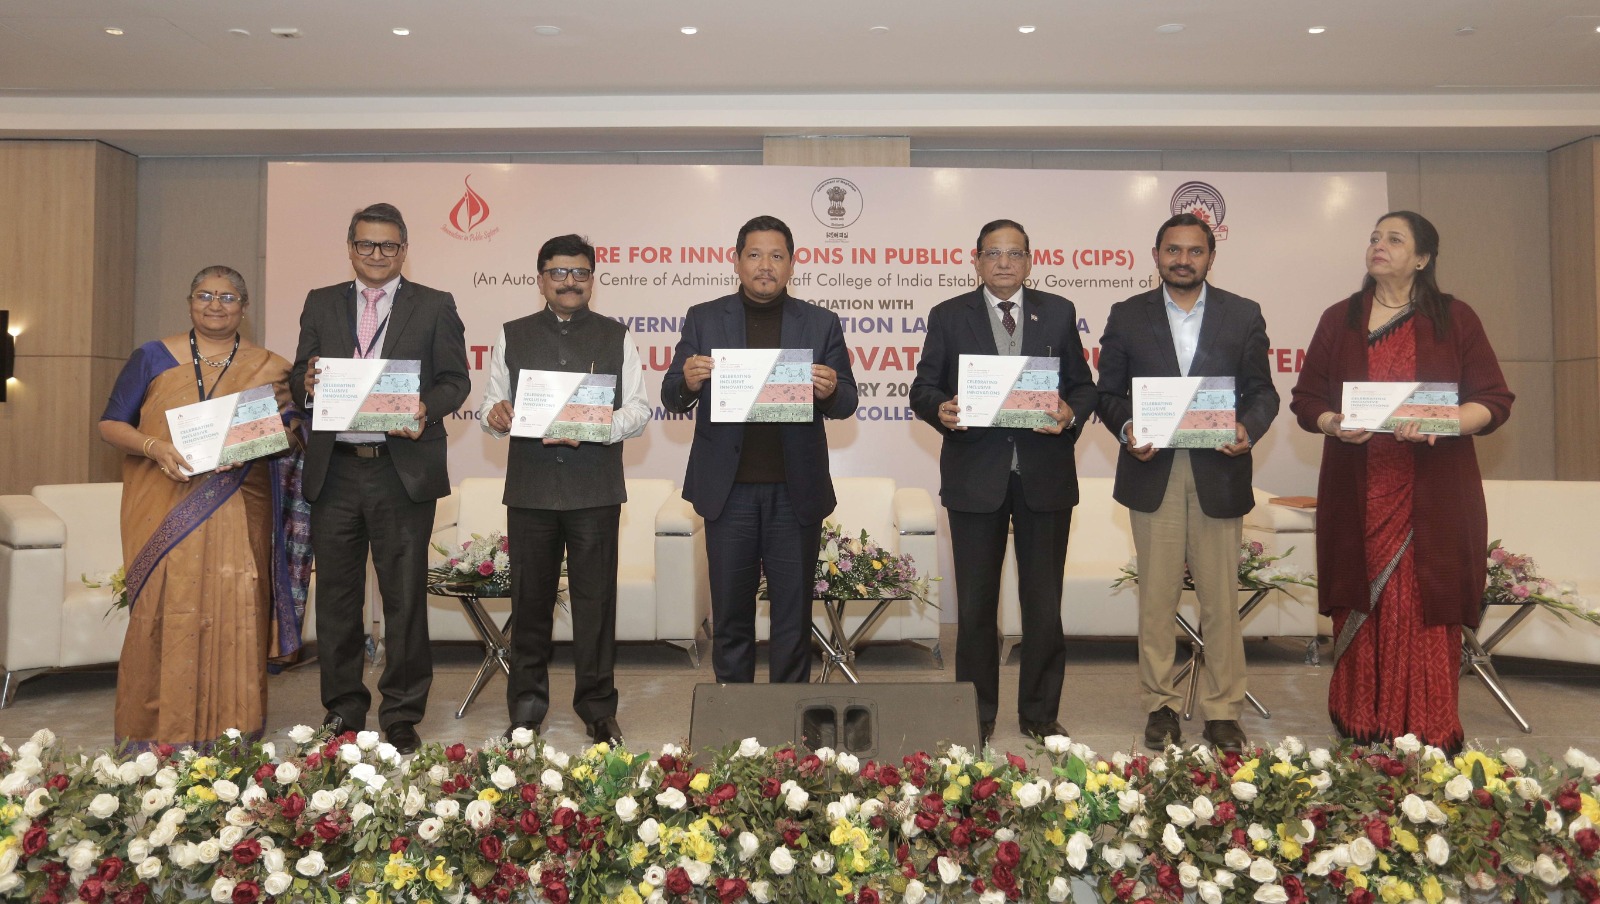 Meghalaya awarded for innovation in health sector, NITI Ayog member appreciates state’s innovations